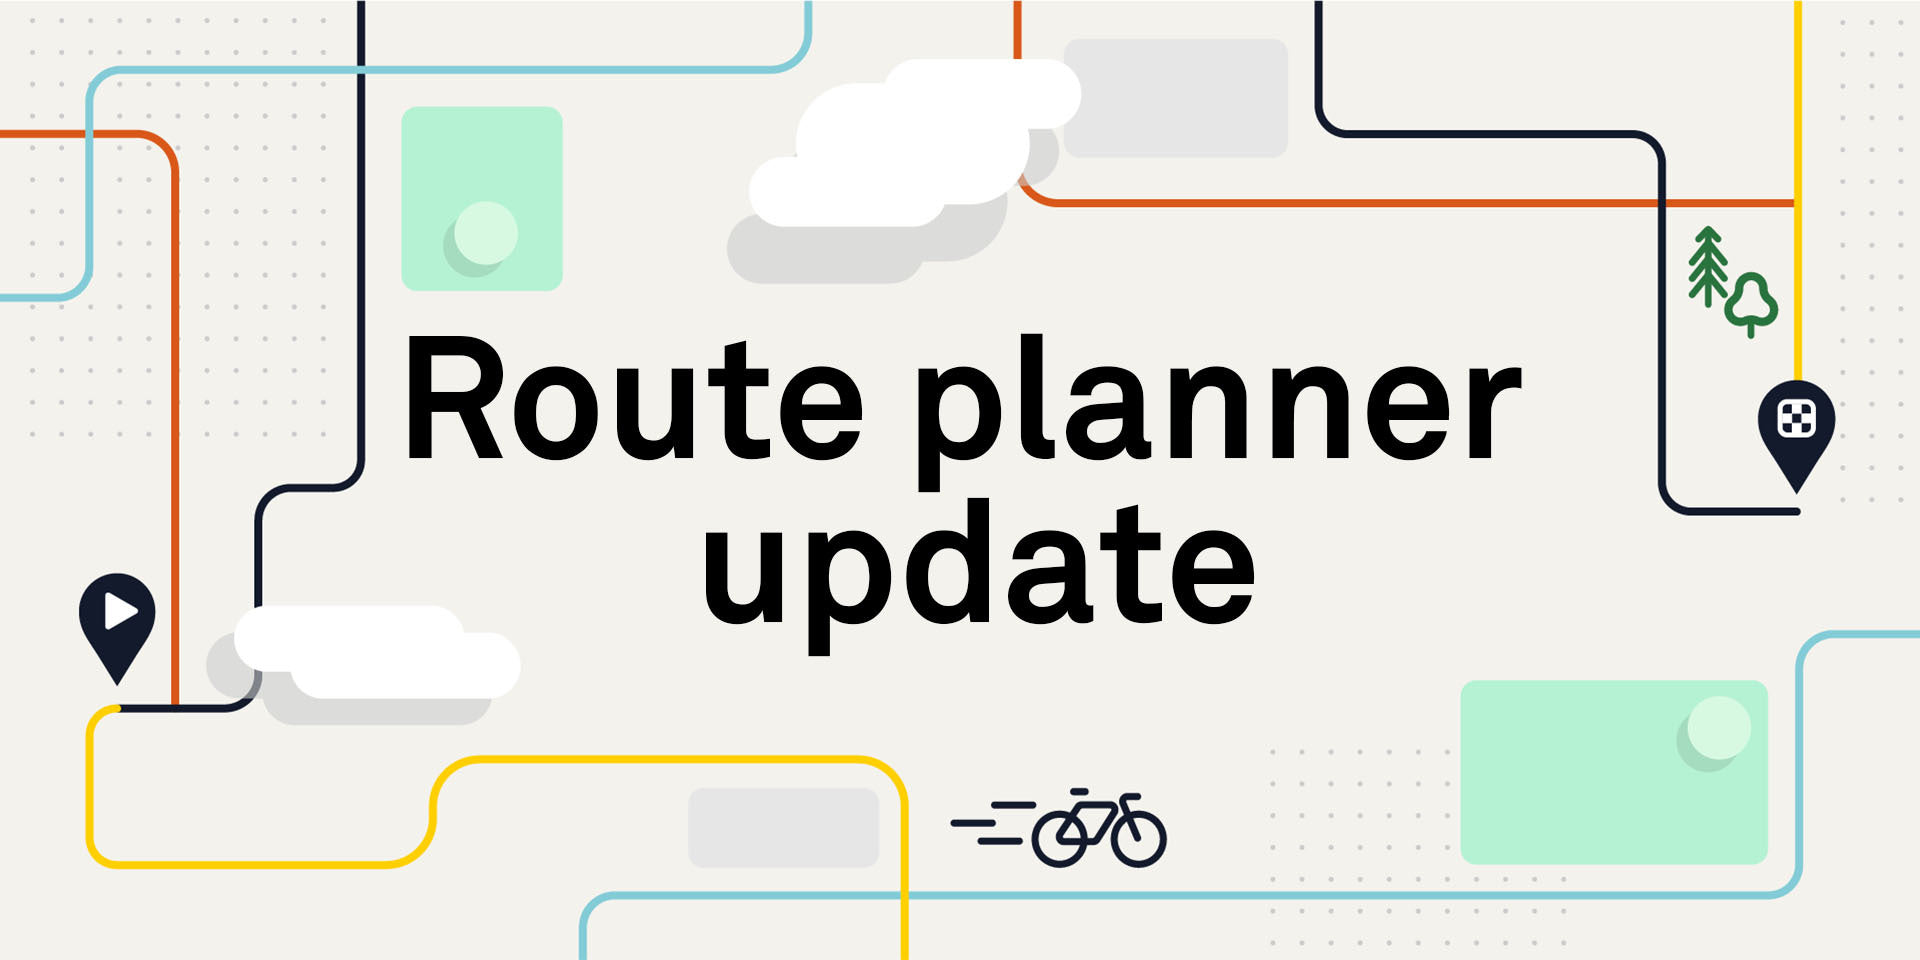 Route planner update